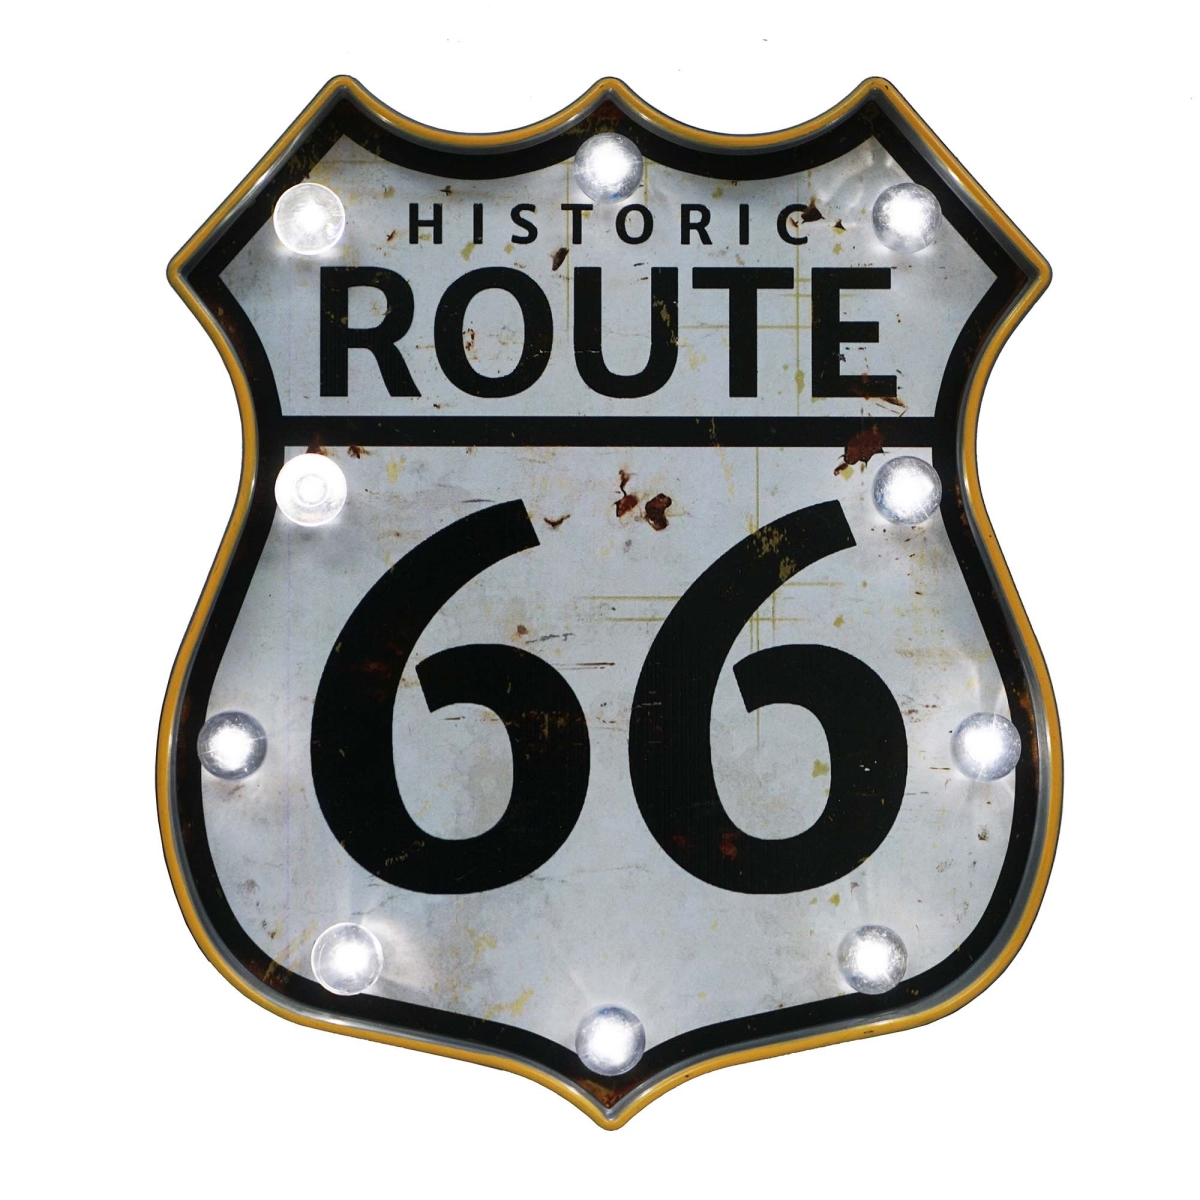 Bm-jd1794 Led Lighted Route 66 Wall Decor